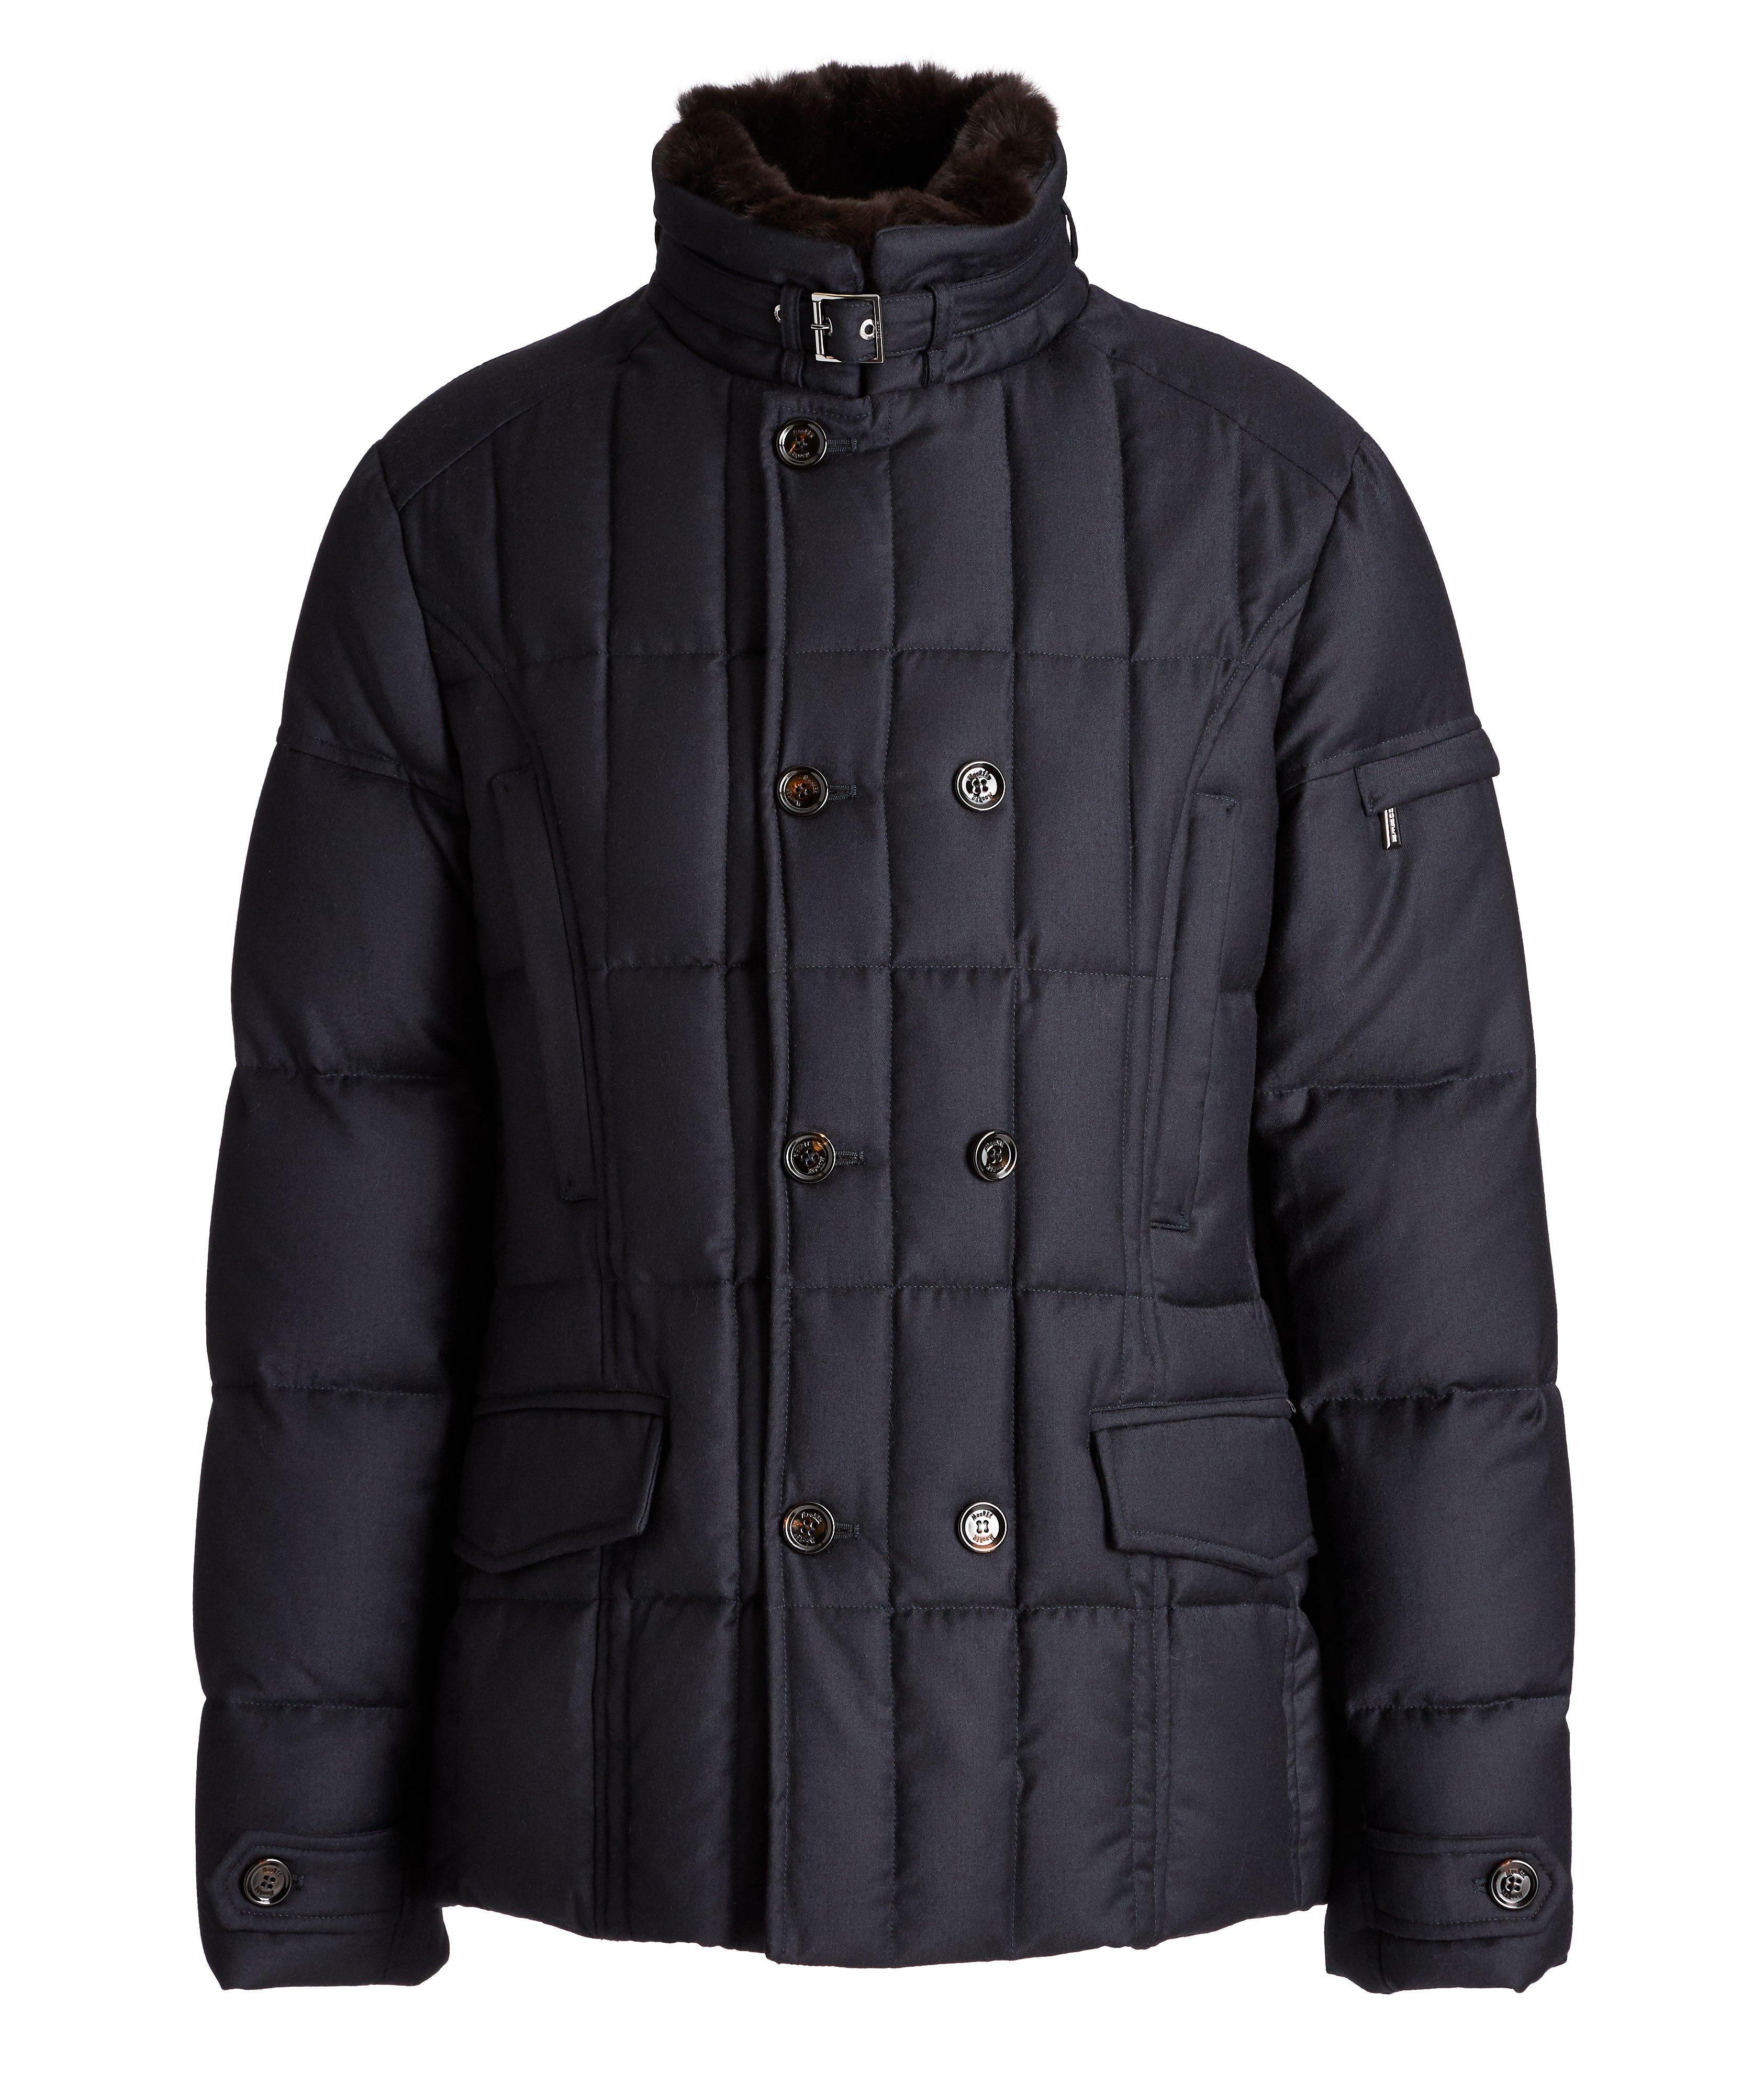 Siro Quilted Wool-Cashmere Jacket image 0